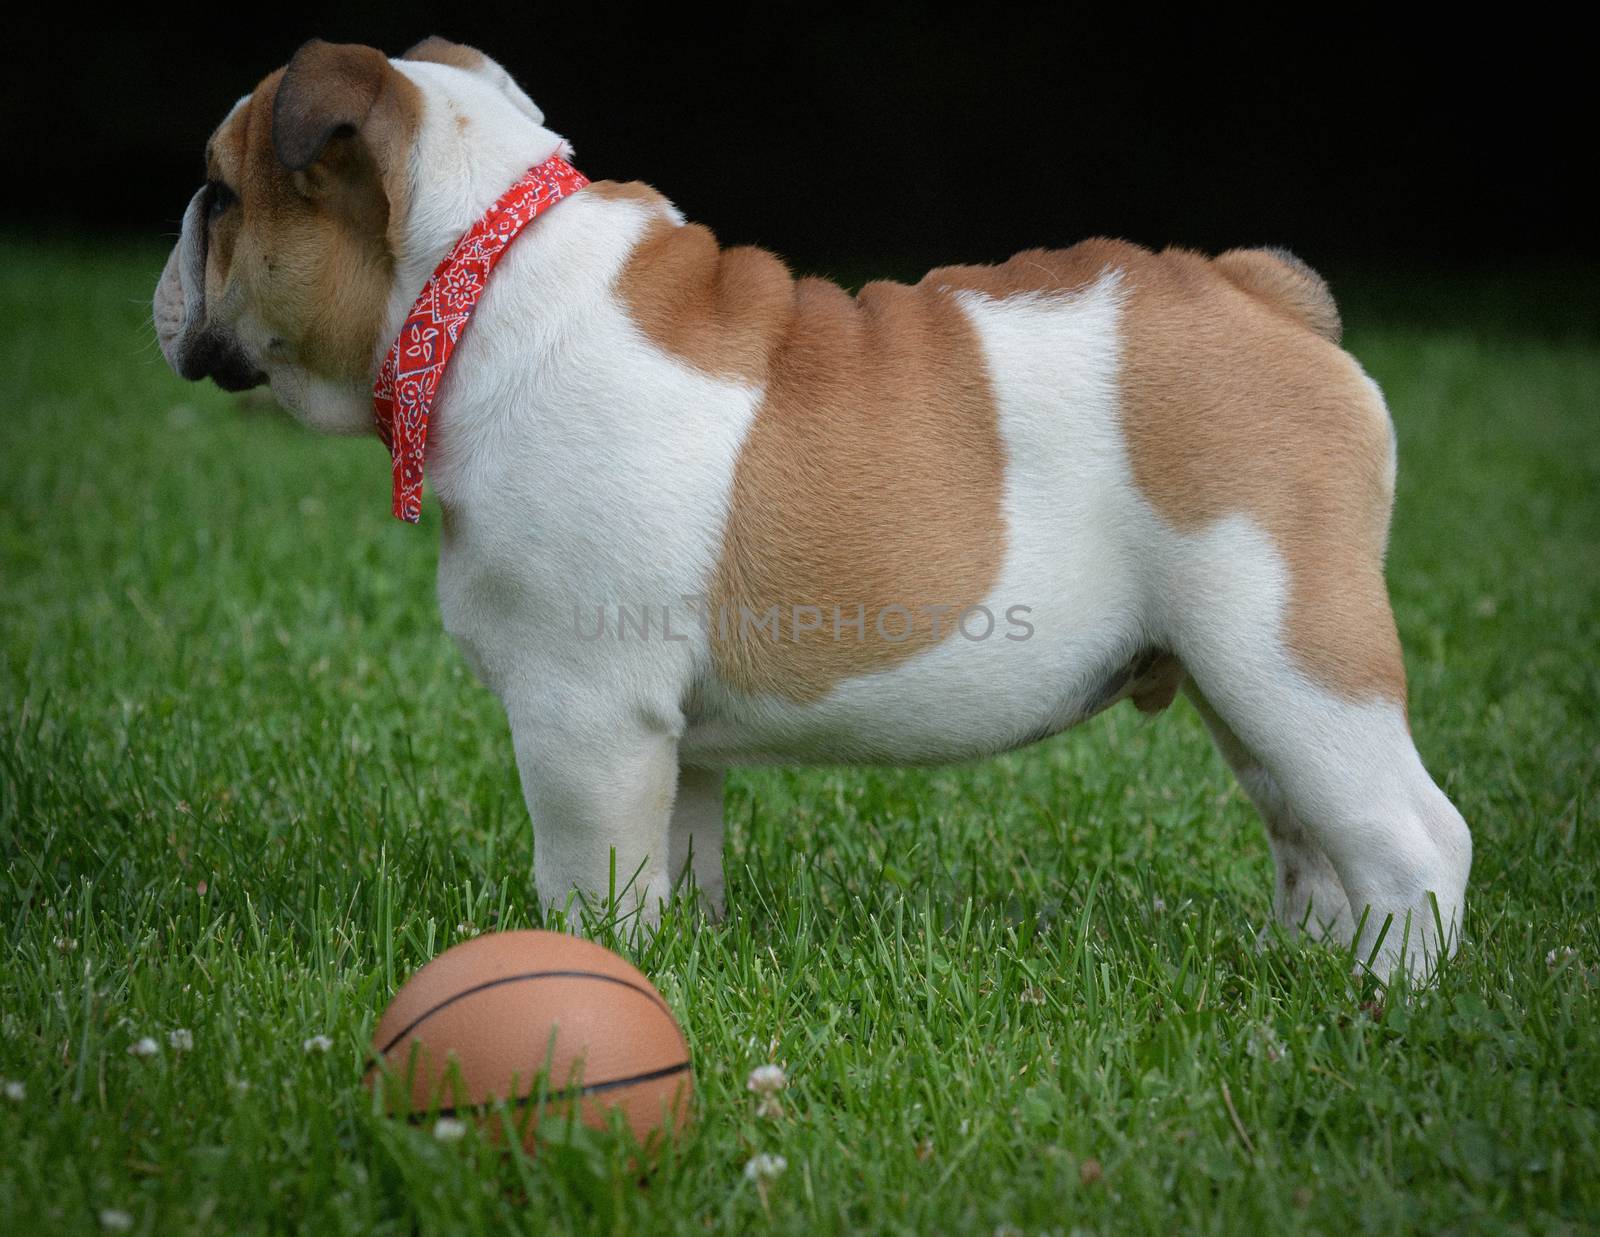 dog playing with a ball outdoors in the park - bulldog